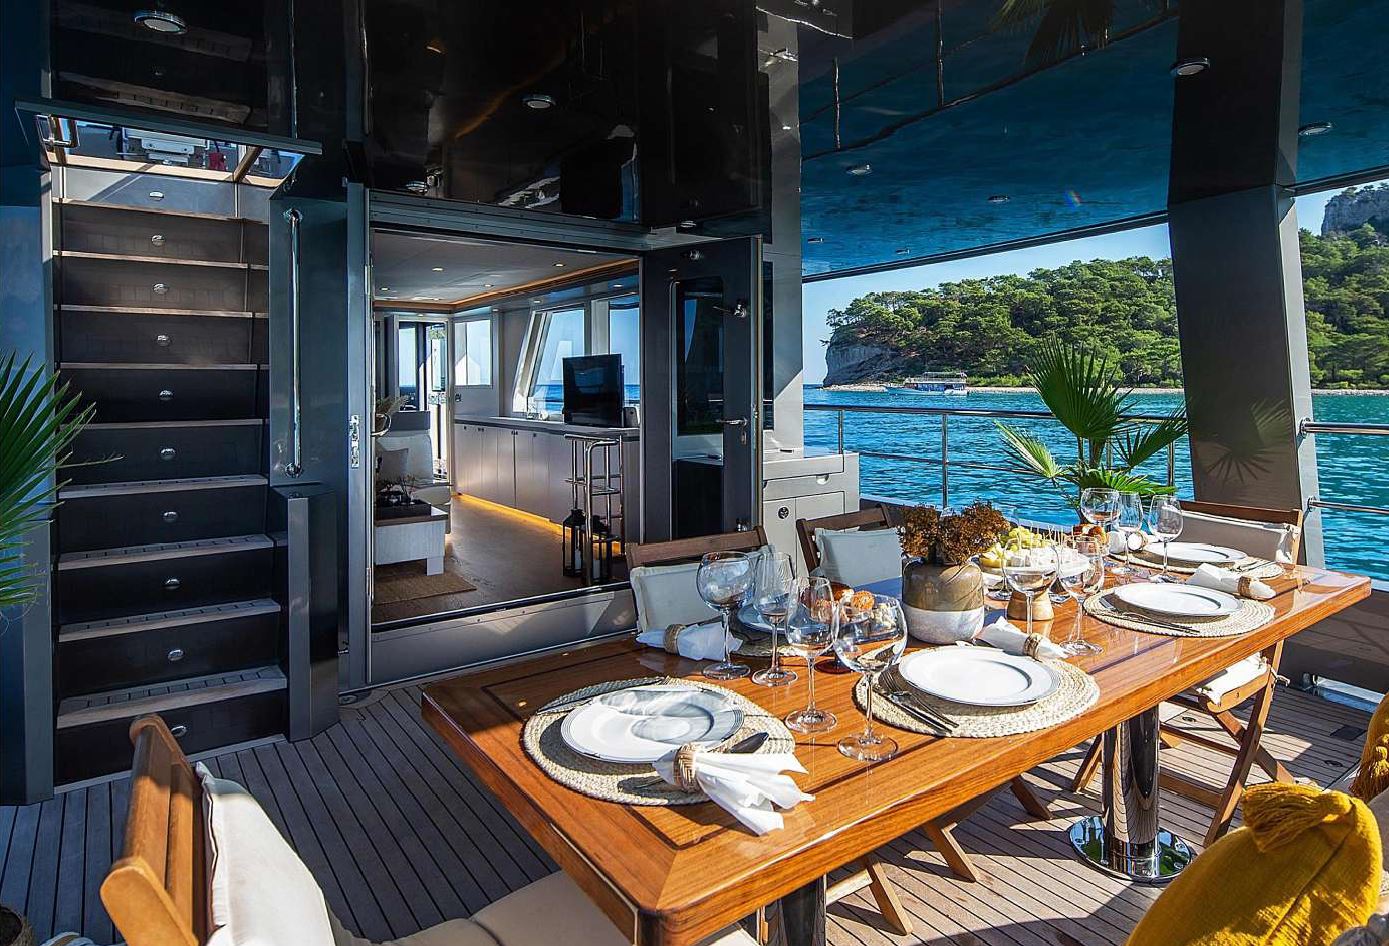 Outdoor dining - Bering explorer yacht LIBERTY for sale - YACHTZOO